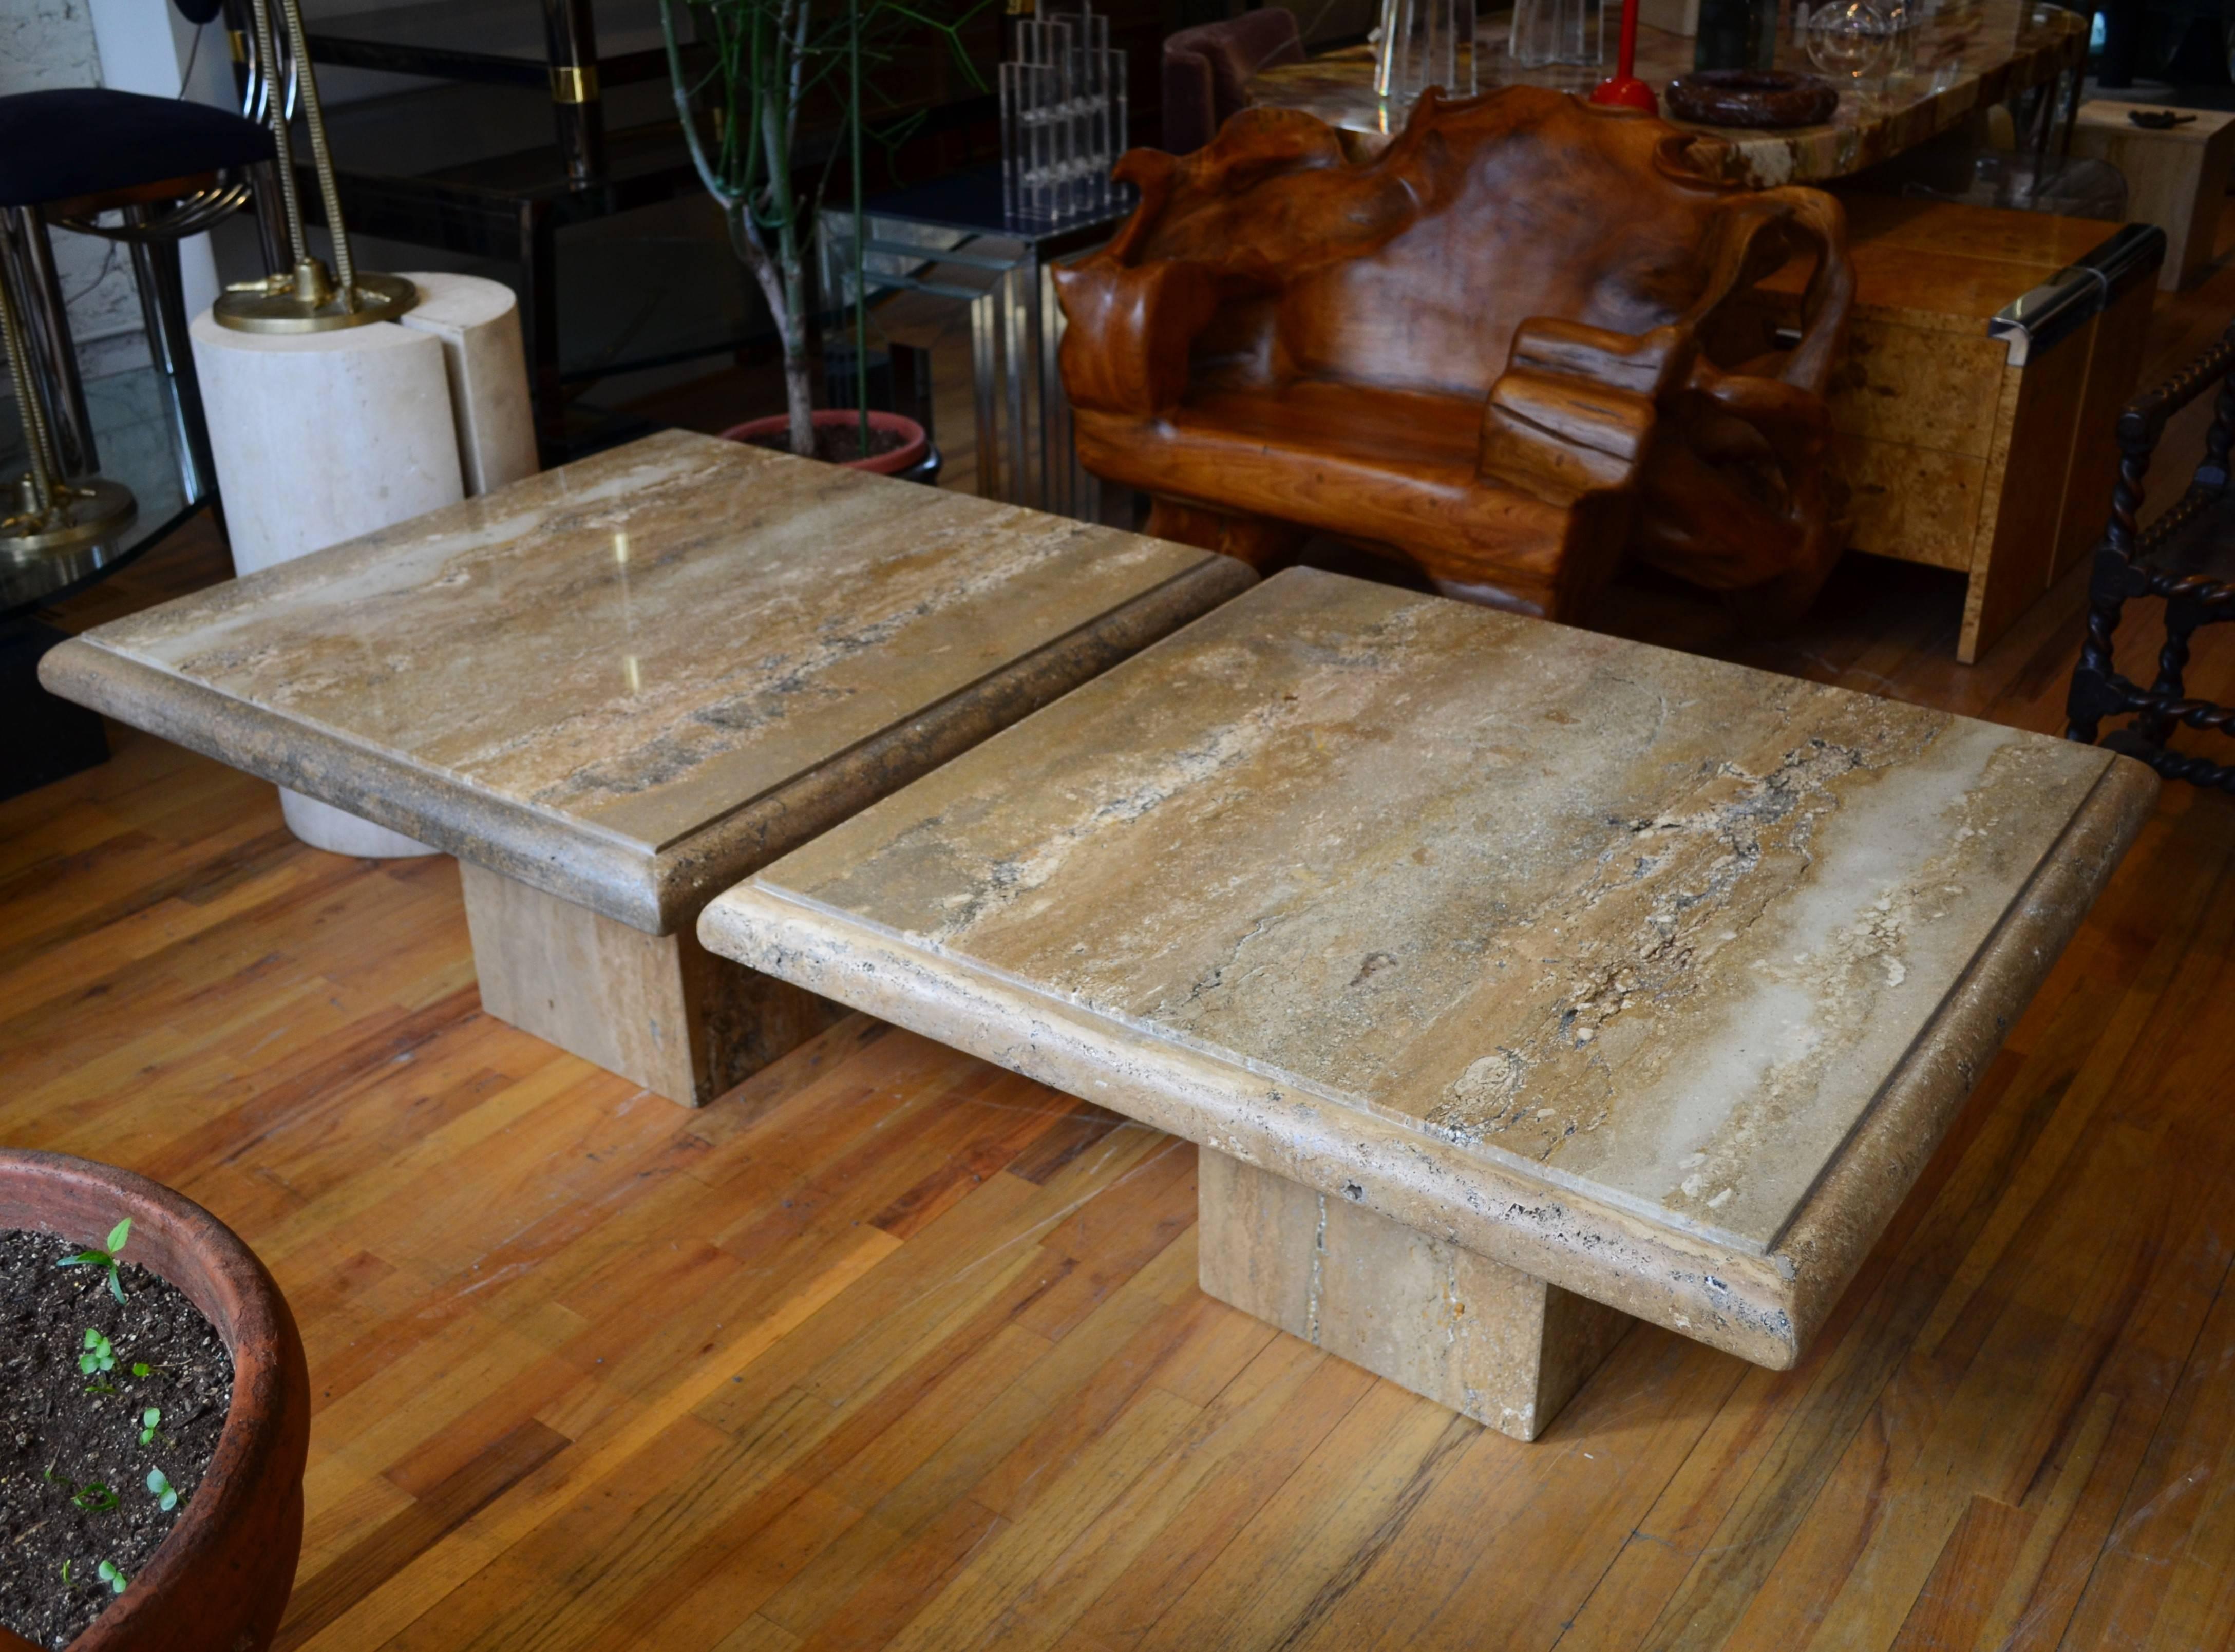 Italian Travertine pair of square pedestal coffee tables. 
The tables brown travertine tops have a robust active
vein pattern. Would also work well as side or end tables.